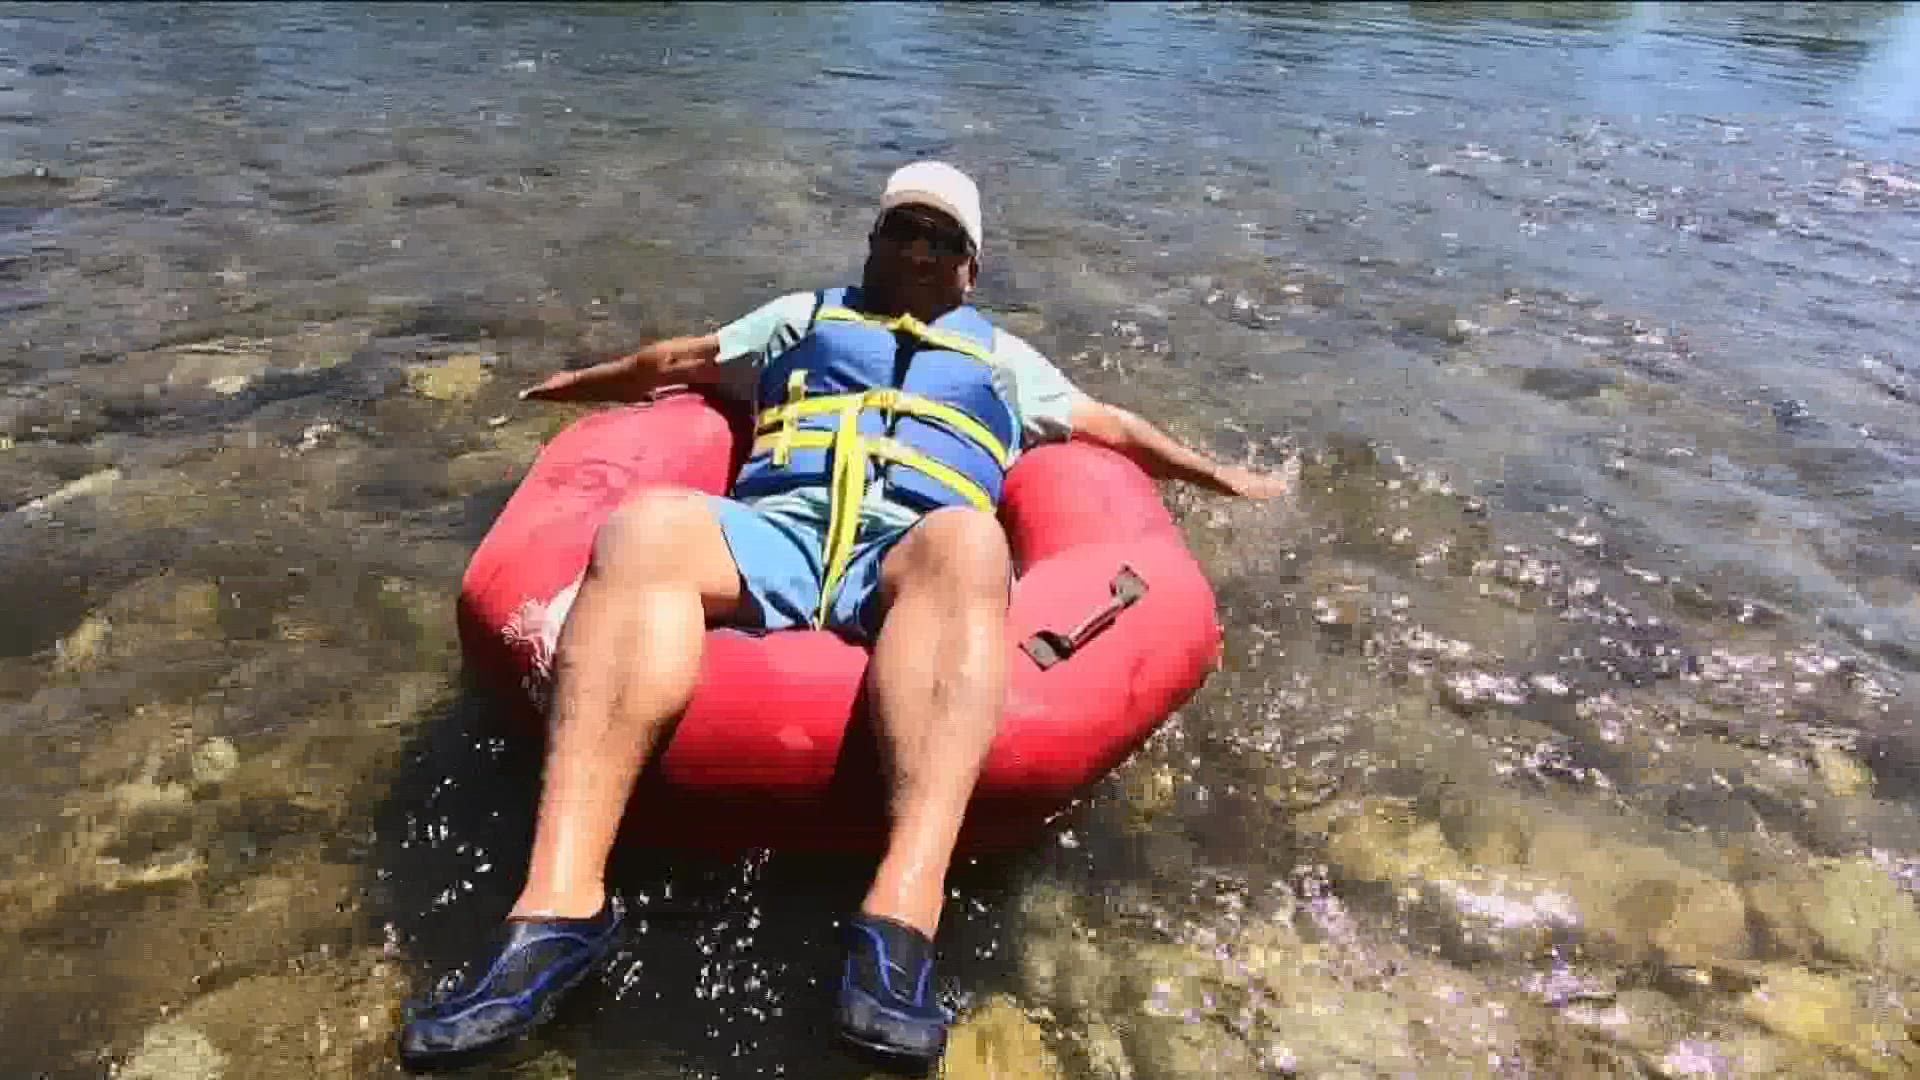 Ada County Parks and Waterways spokesperson said wearing a life jacket is similar to wearing a seat belt.